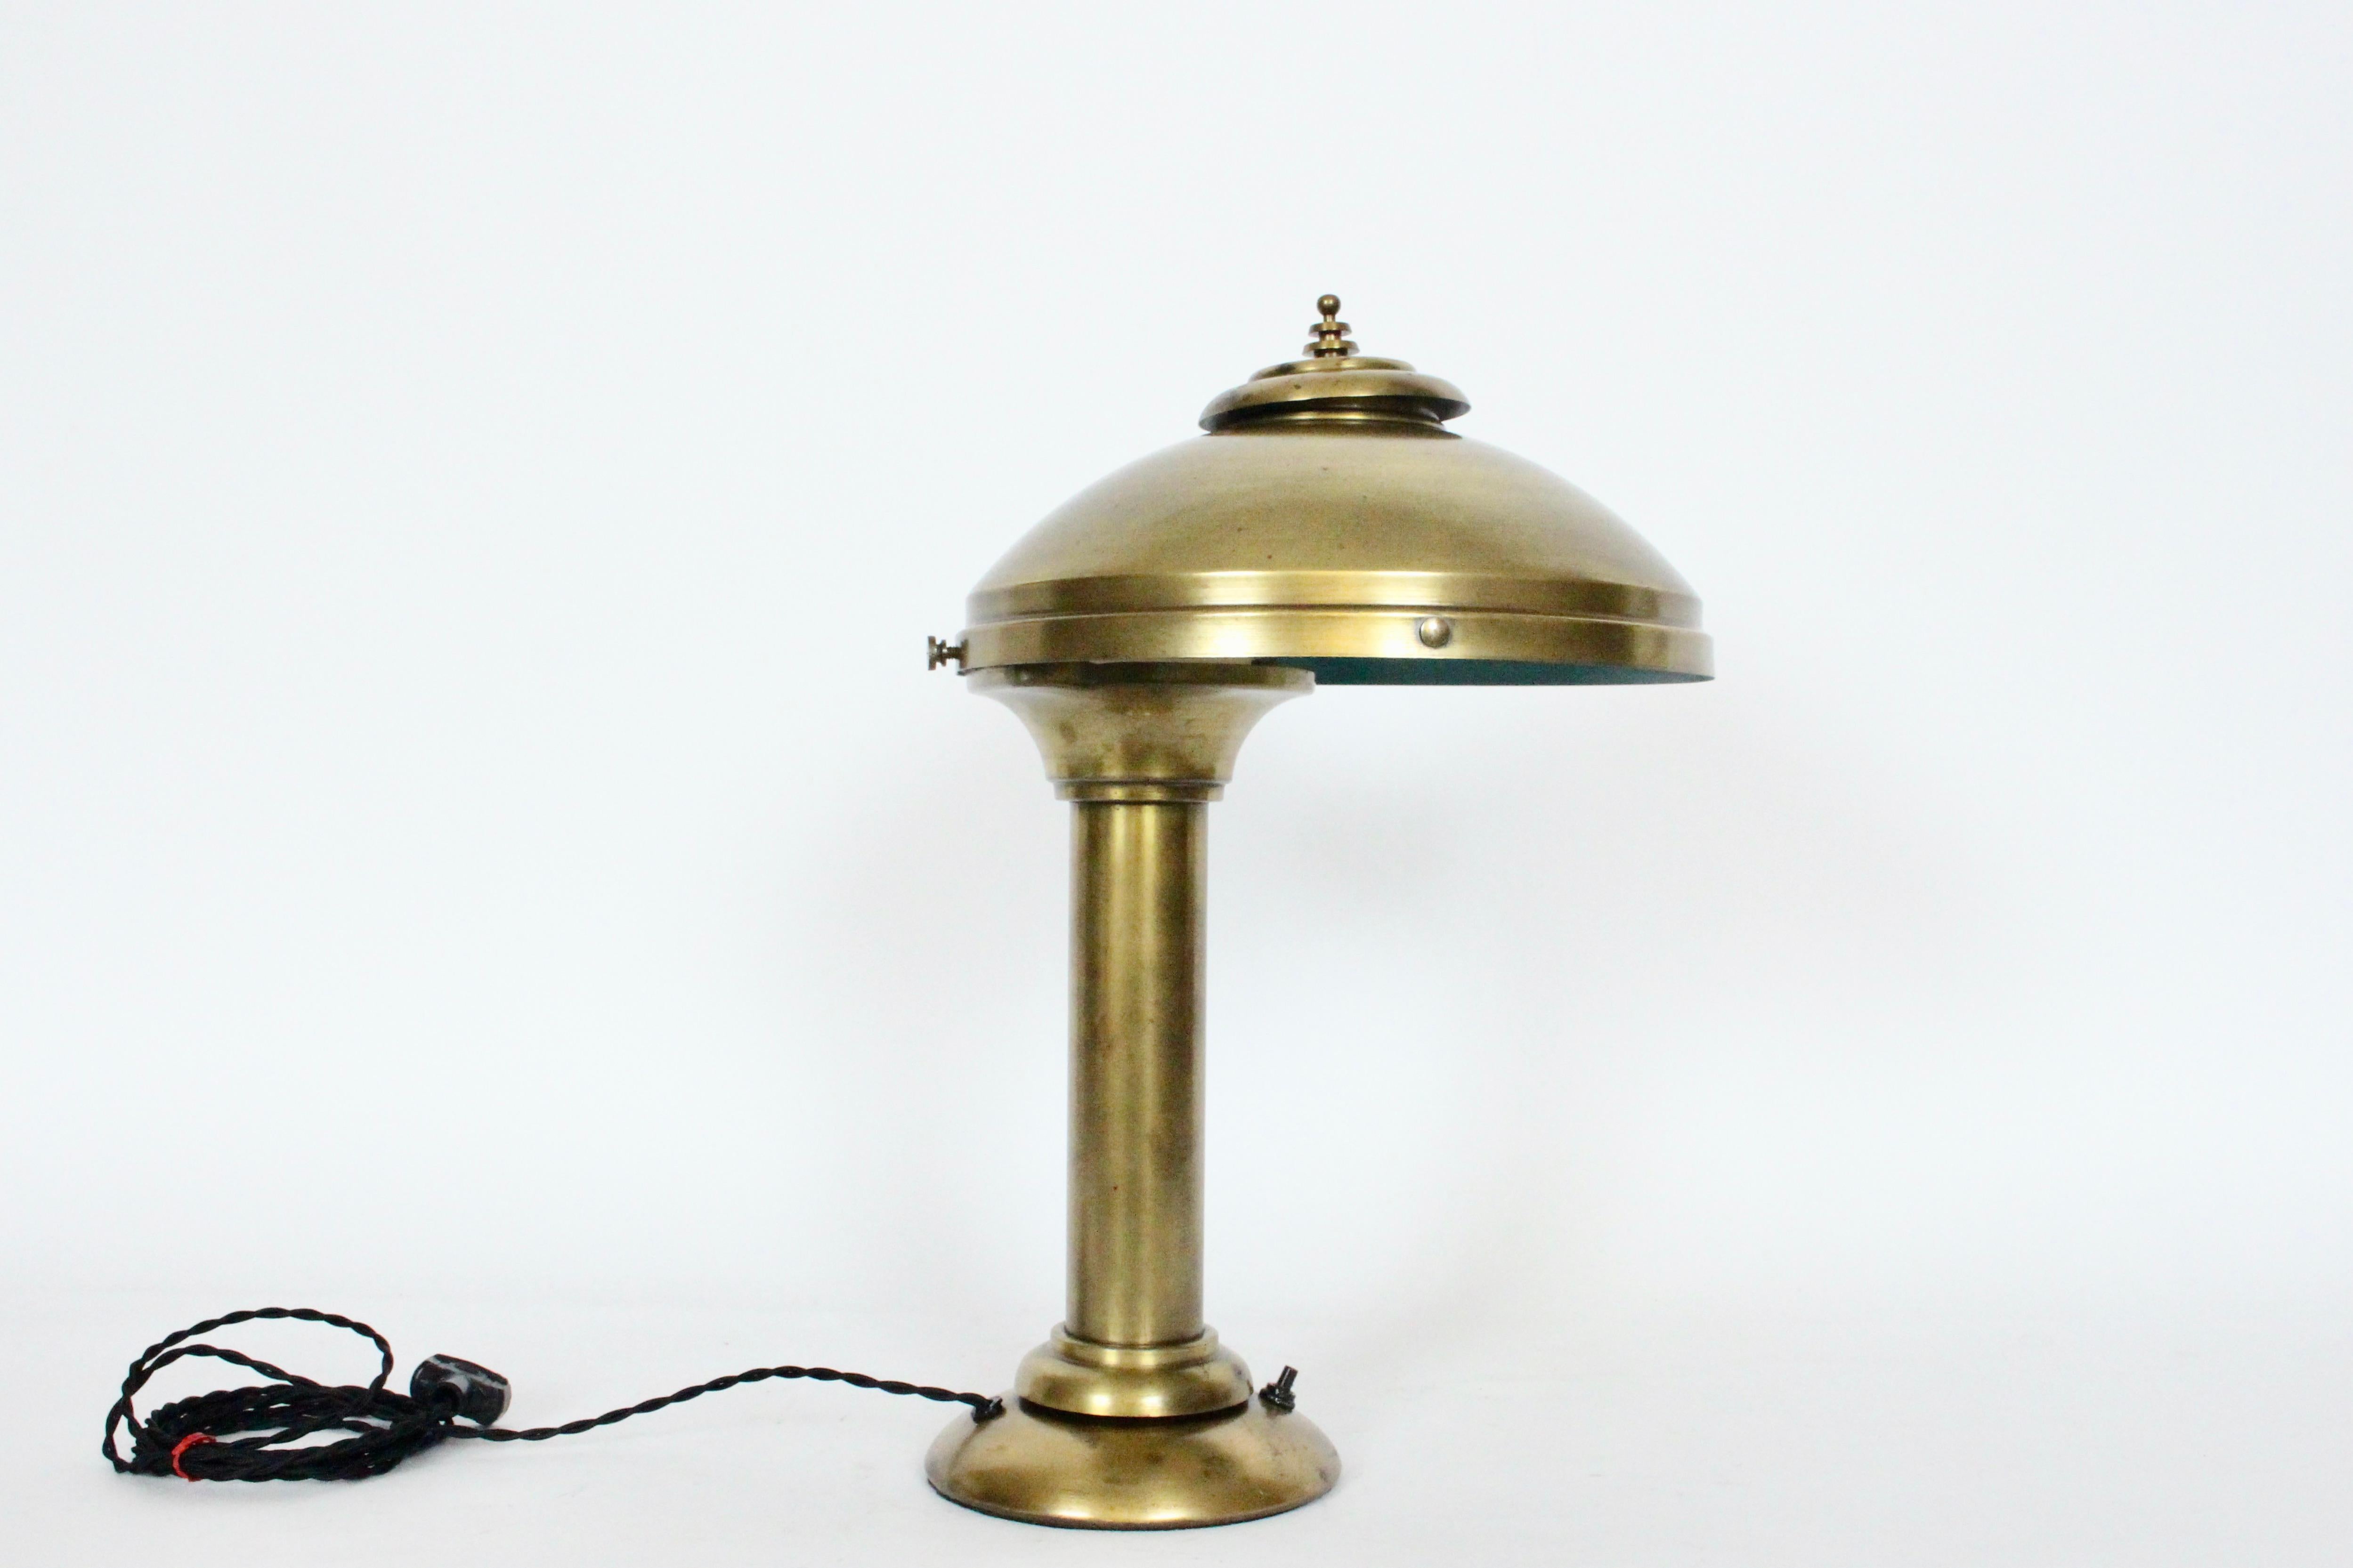 Fairies Mfg. Co. Brass Cantilever Desk Lamp, 1920s In Good Condition For Sale In Bainbridge, NY